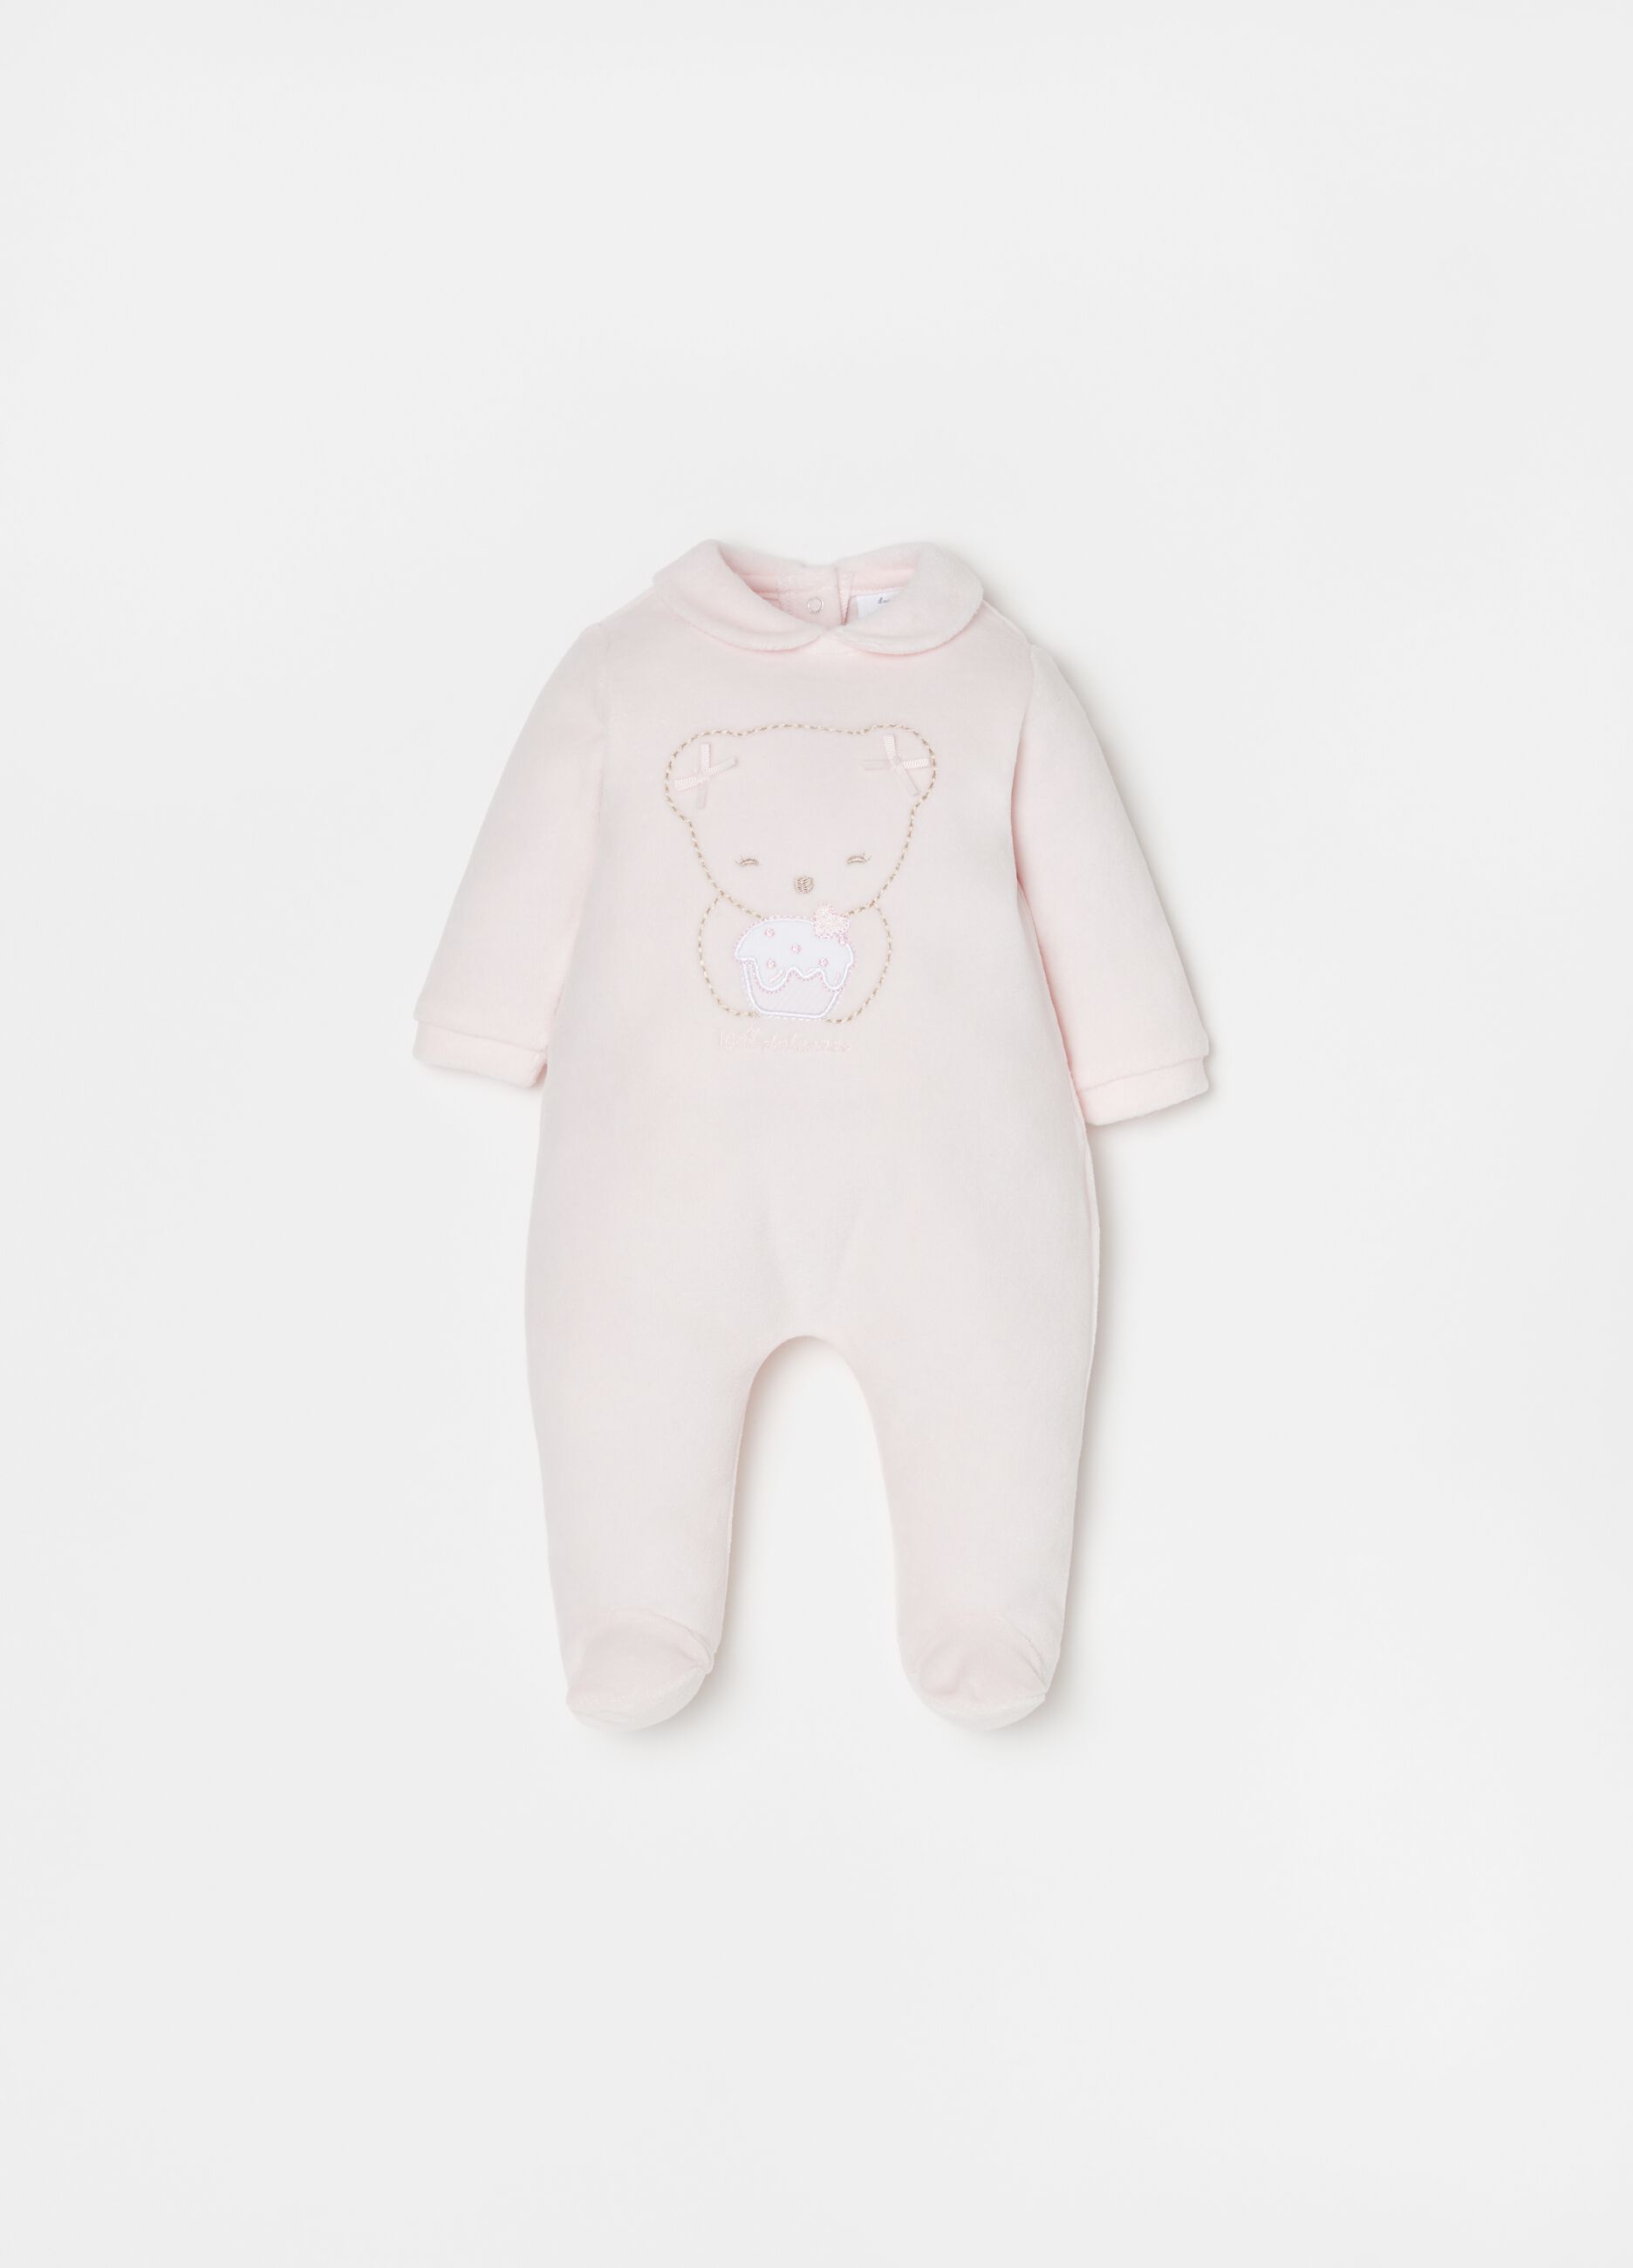 Onesie with girl teddy bear and pastry embroidery